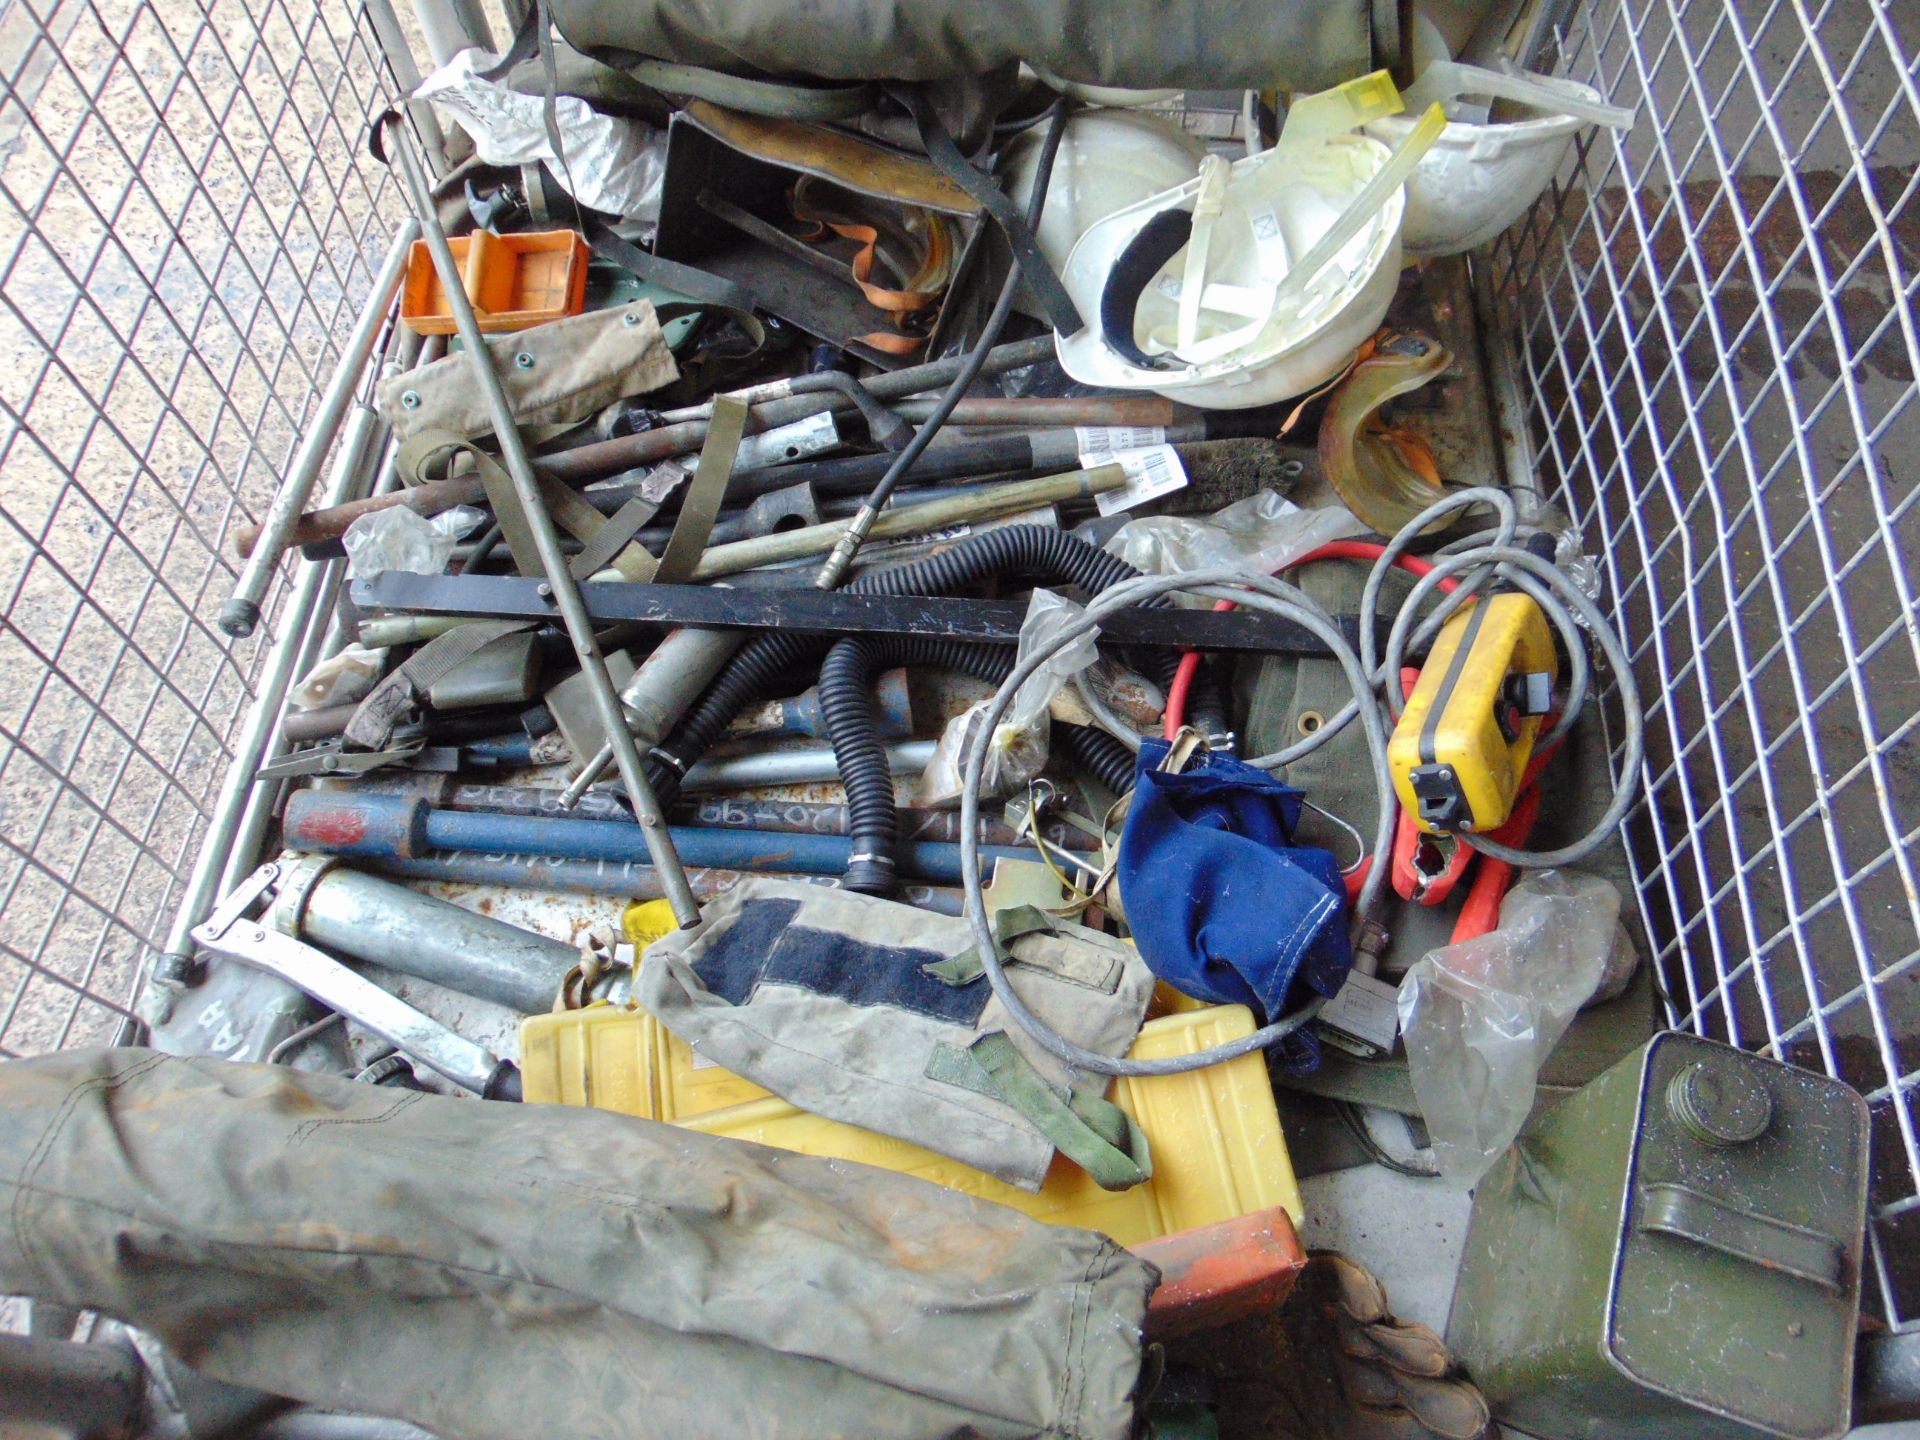 1x Stillage of Tools, Winch control, Jump Leads etc etc - Image 5 of 7